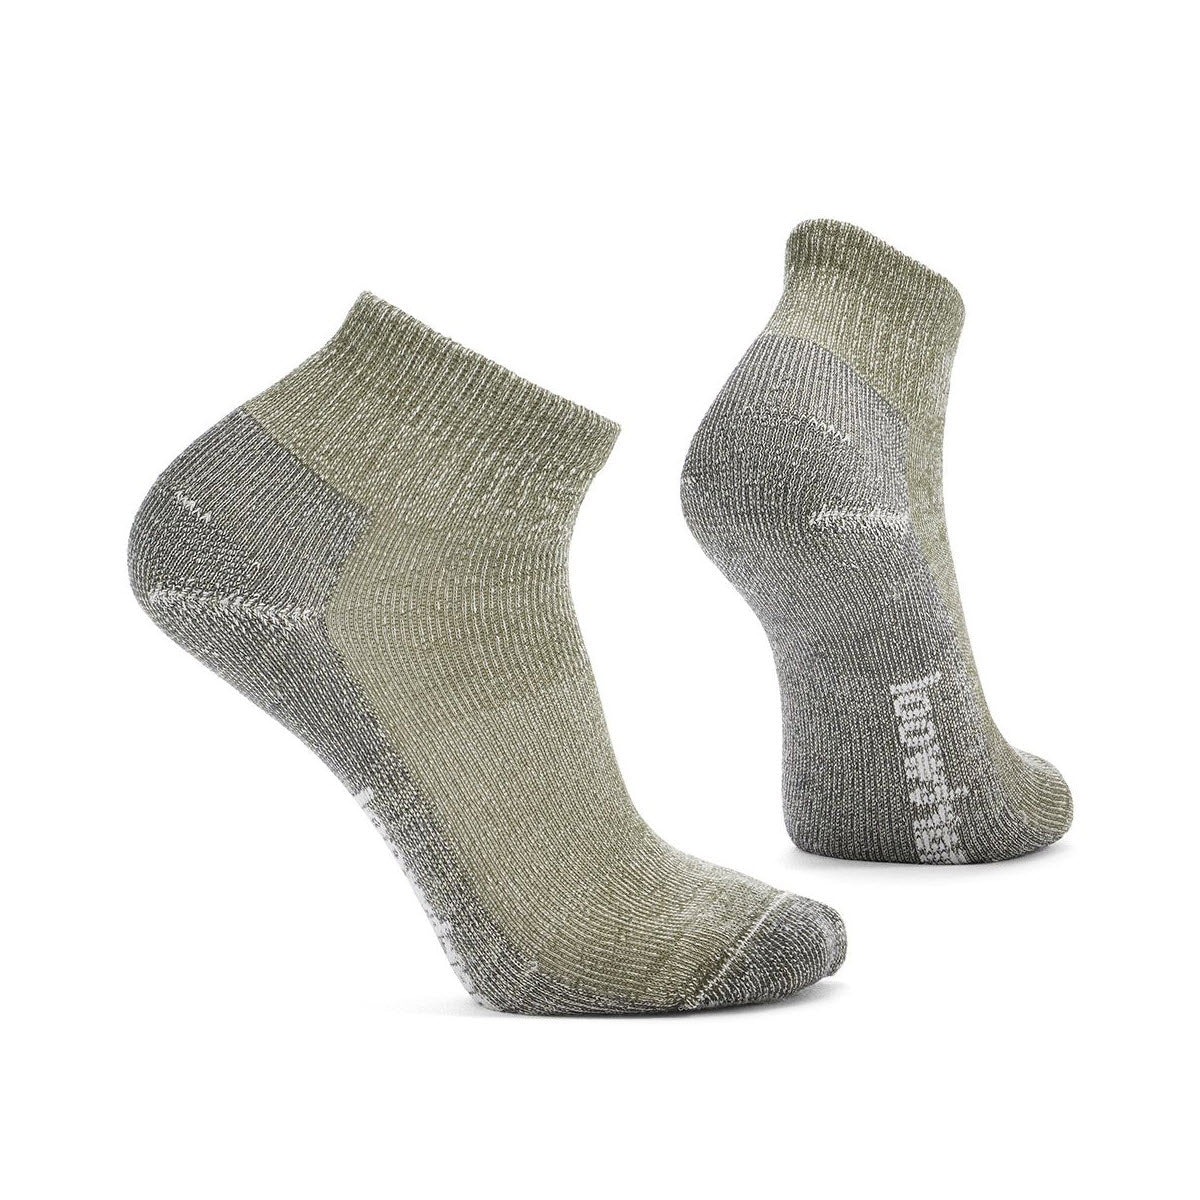 A pair of green Smartwool Hike Classic ankle socks in military olive for men isolated on a white background, designed with reinforced heel and toe regions.